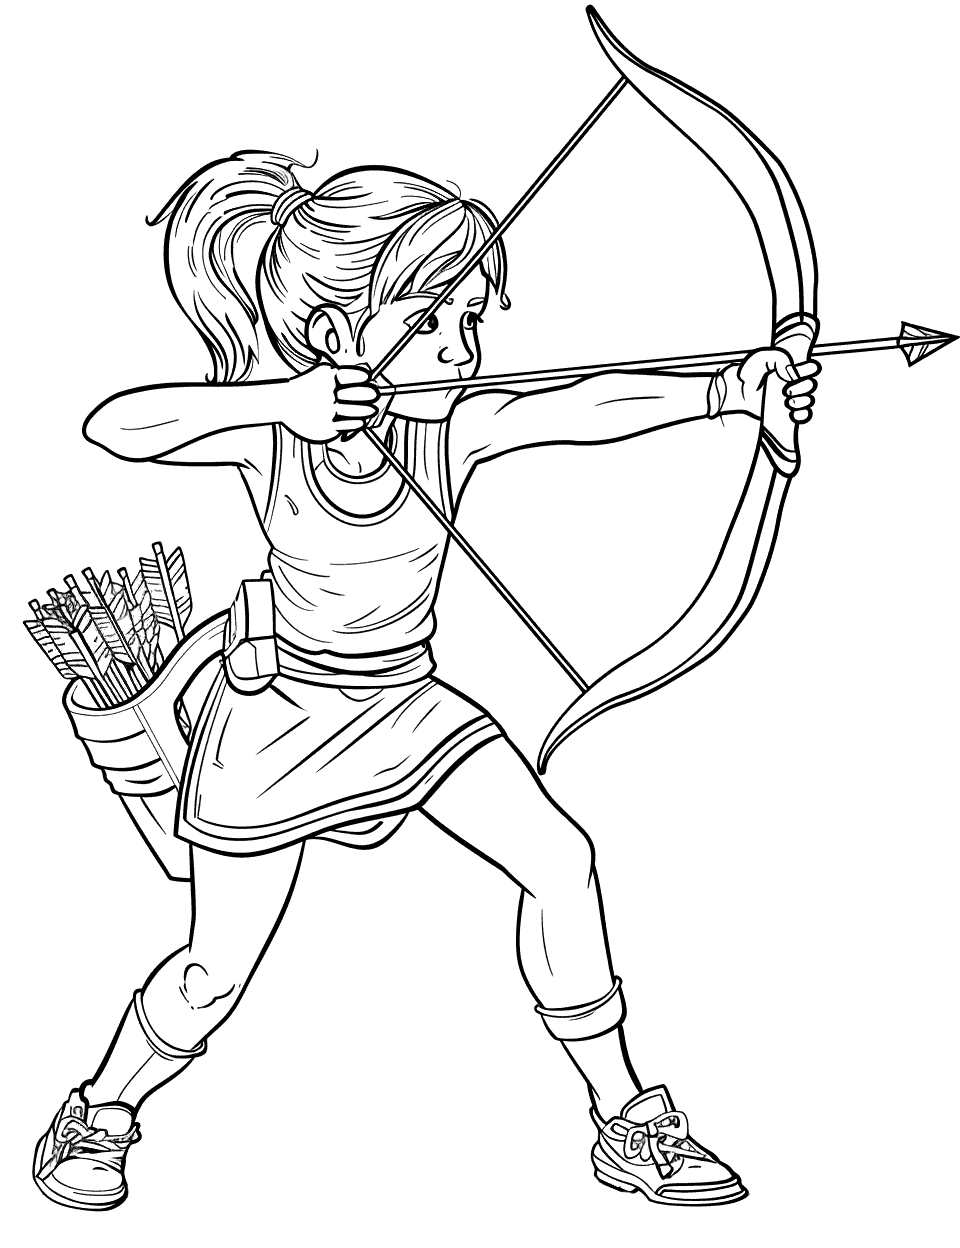 Archery Focus Sports Coloring Page - An archer aiming an arrow with full concentration.